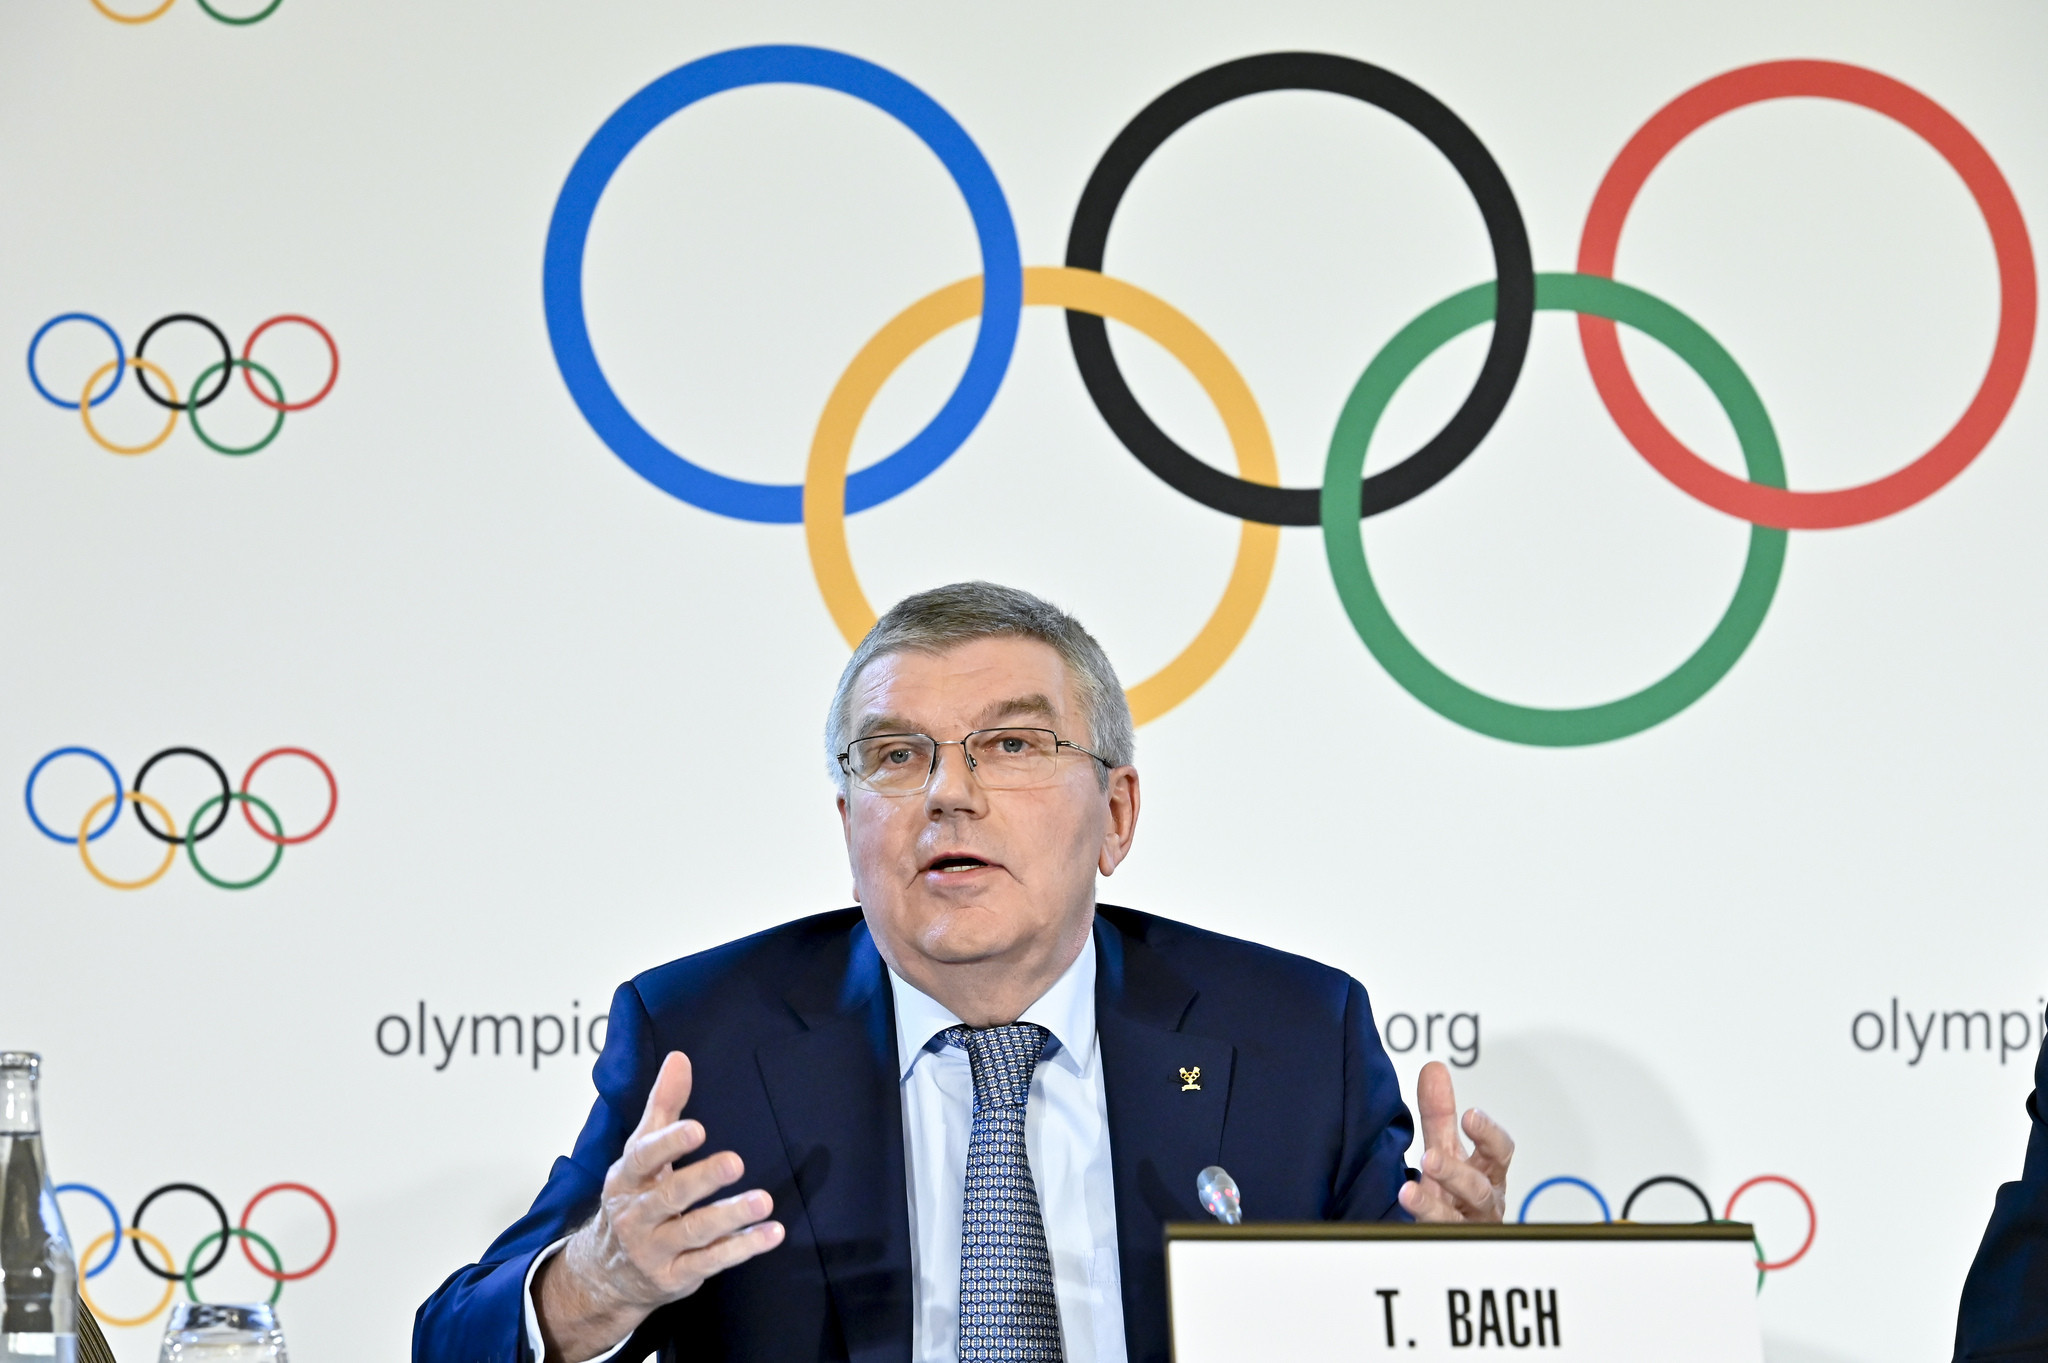 Bach urges authorities investigating worldwide doping ring to hand out tough sanctions to athletes and support staff